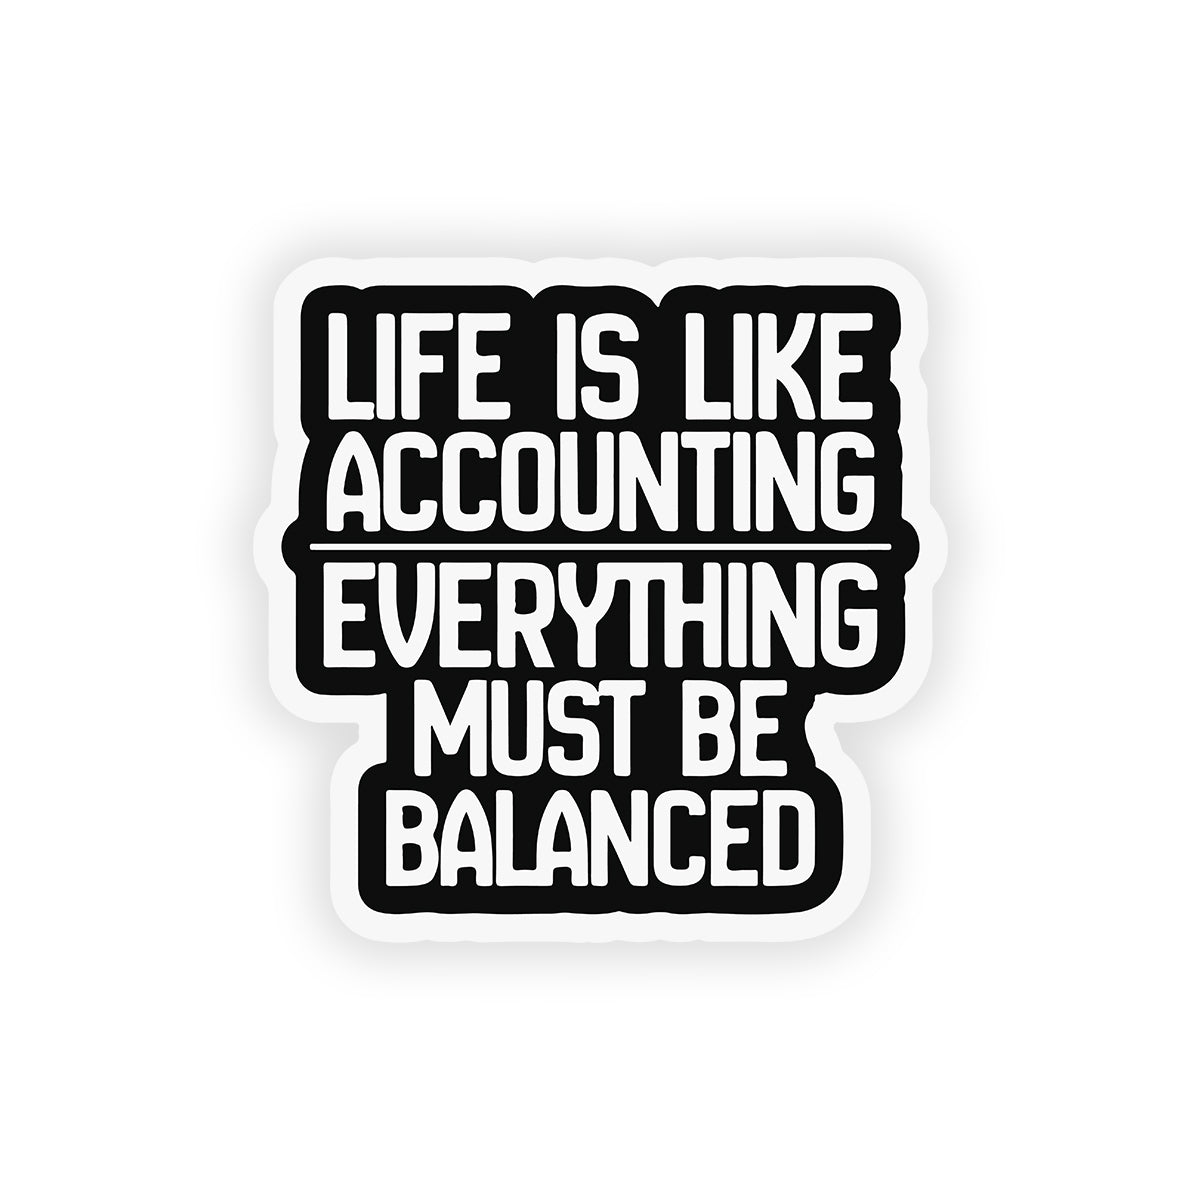 Life is like accounting everything must be balanced